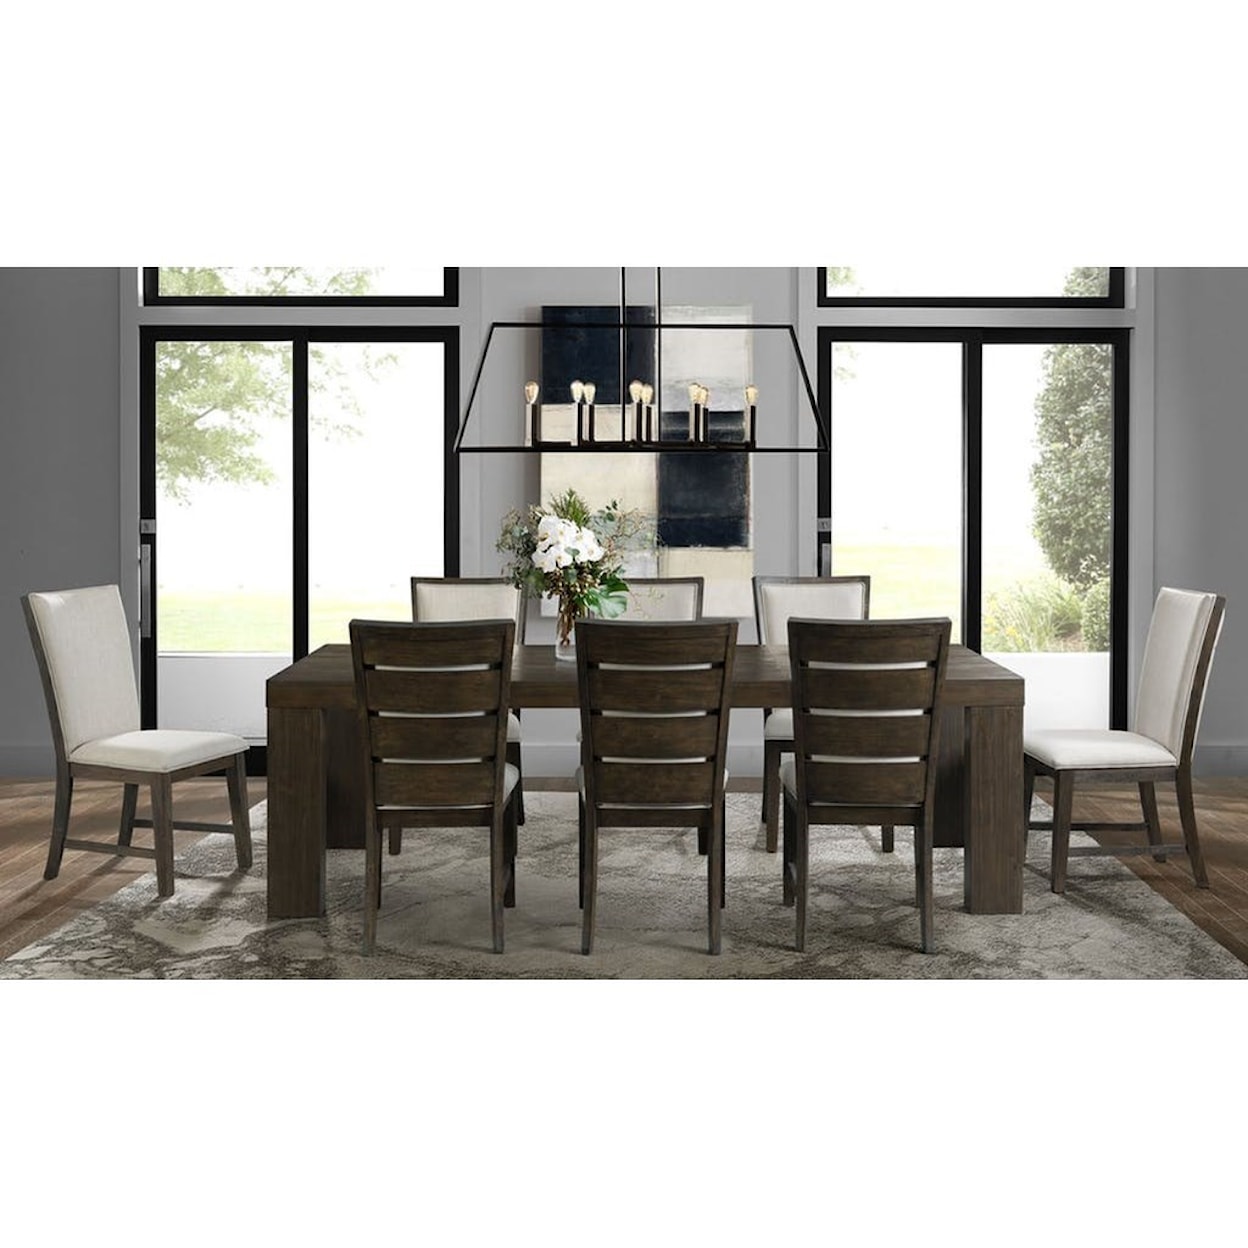 Elements Grady Dining Table Set with 8 Chairs